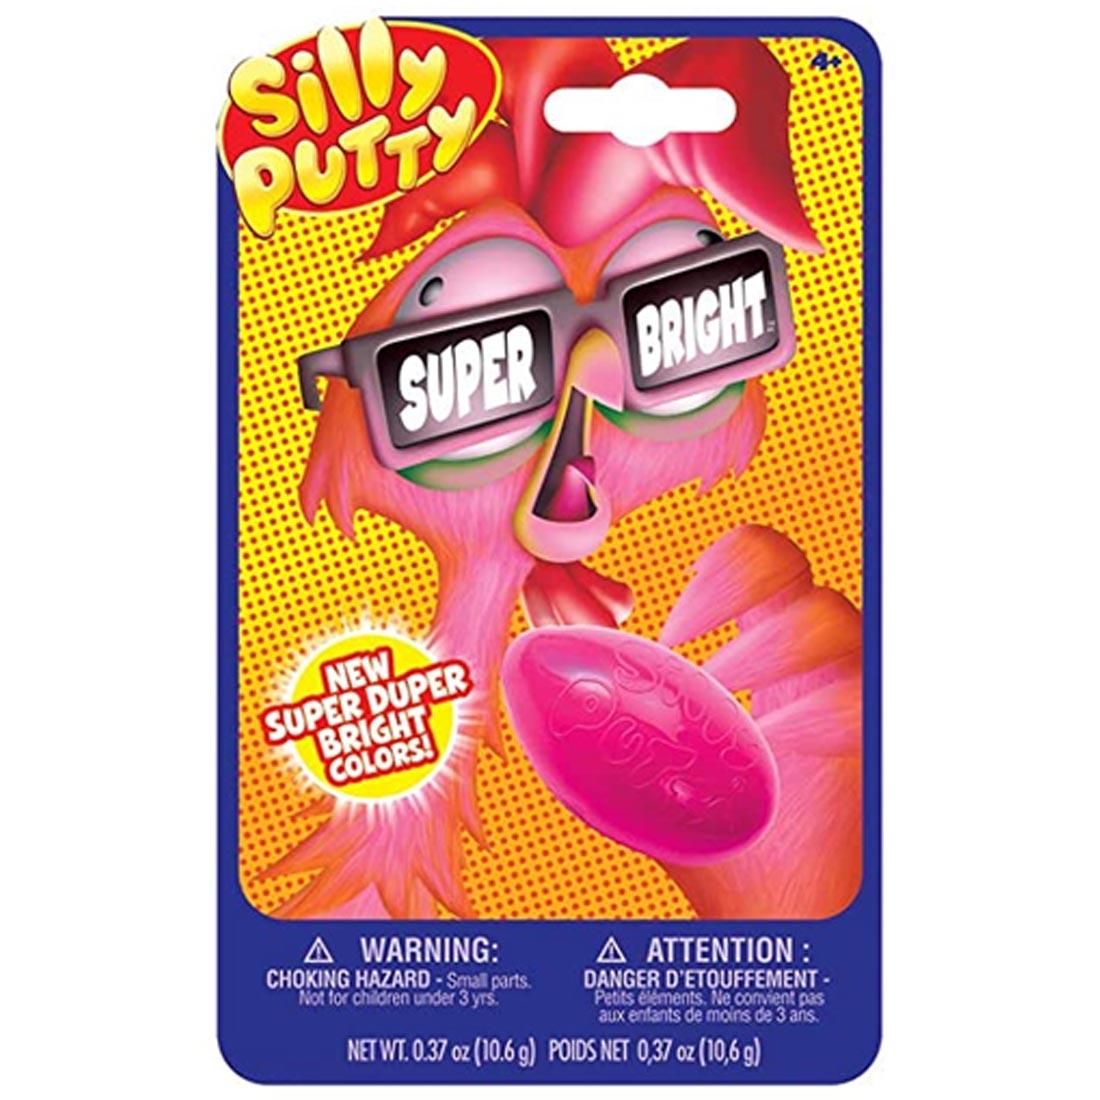 Bright Silly Putty in a hot pink egg with a chicken on the package